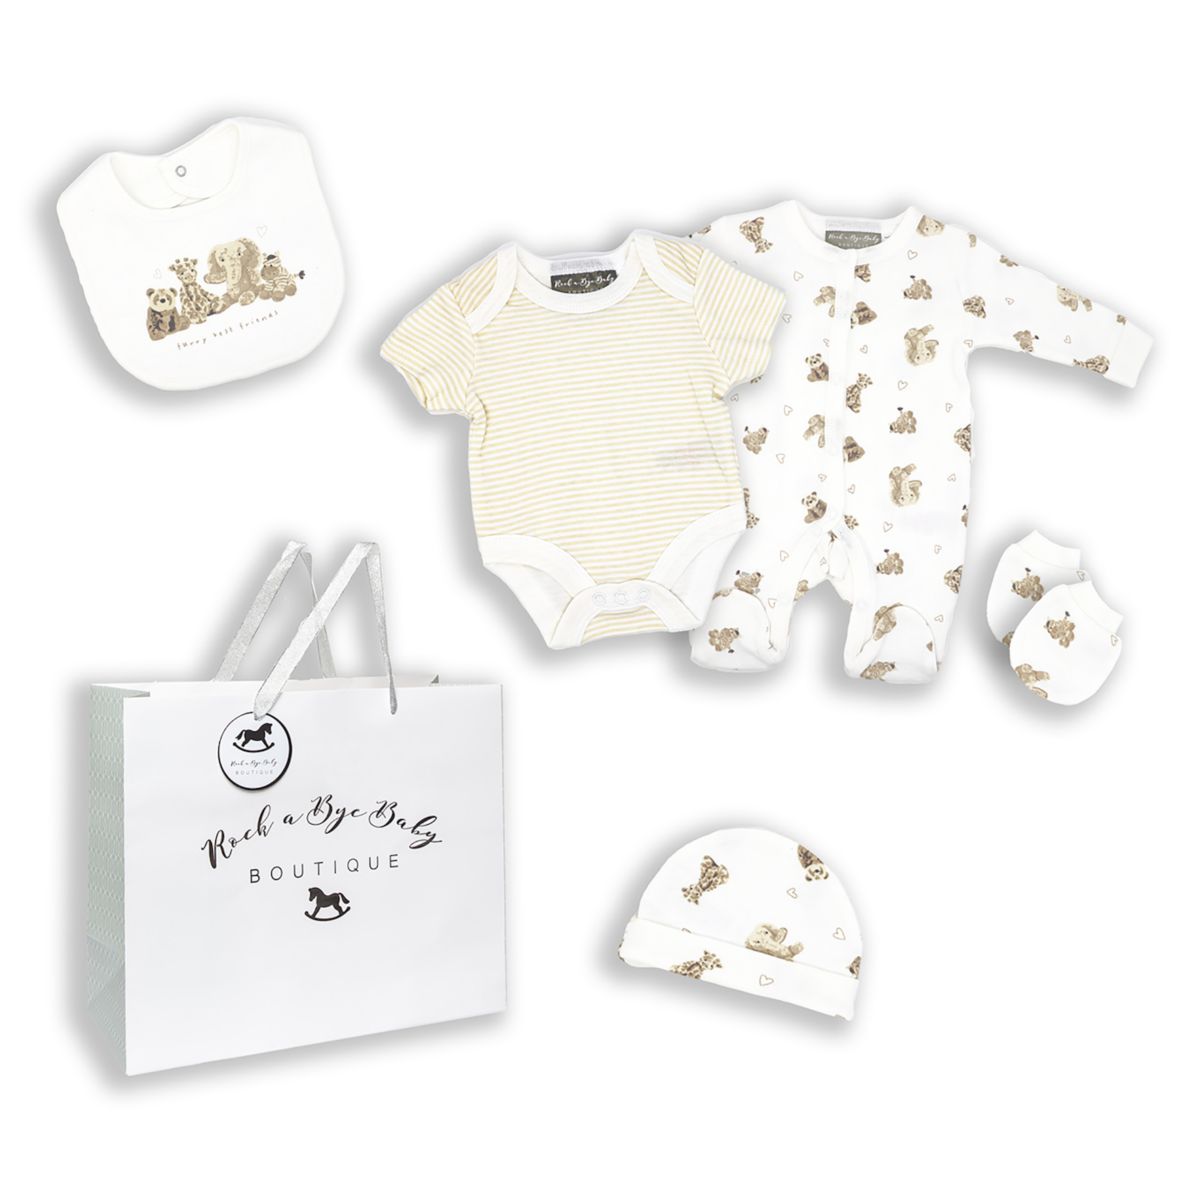 Baby Boys and Girls Furry Besties 5 Pc Layette Gift Set in Mesh Bag Rock A Bye Baby Boutique